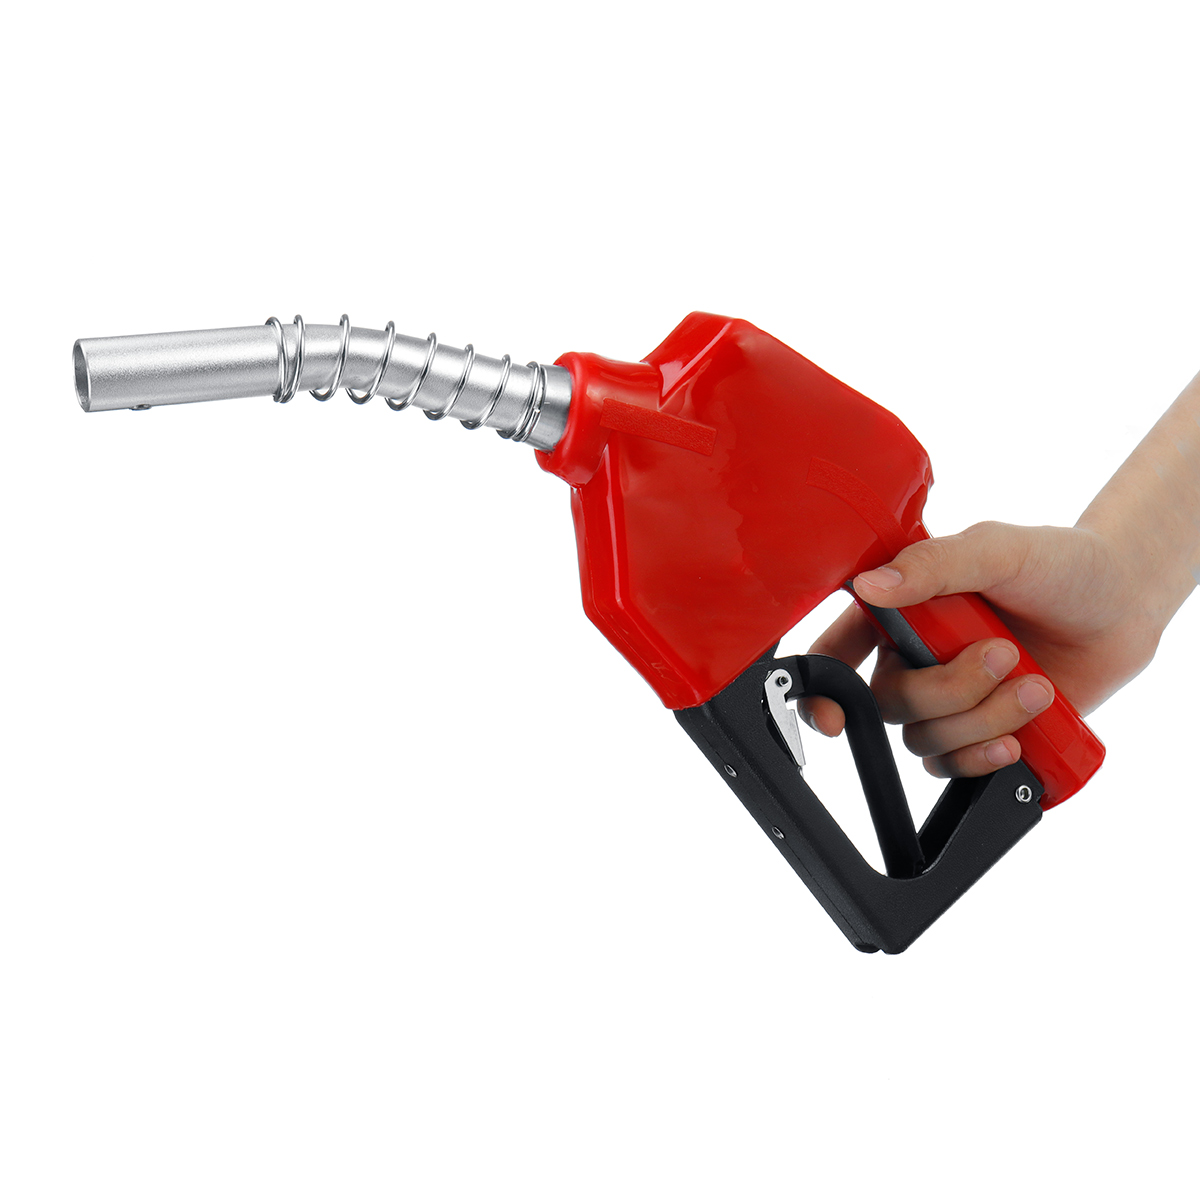 

Stainless Automatic Refuelling Nozzle Diesel Oil Petrol Dispensing Fuel Transfer Tool